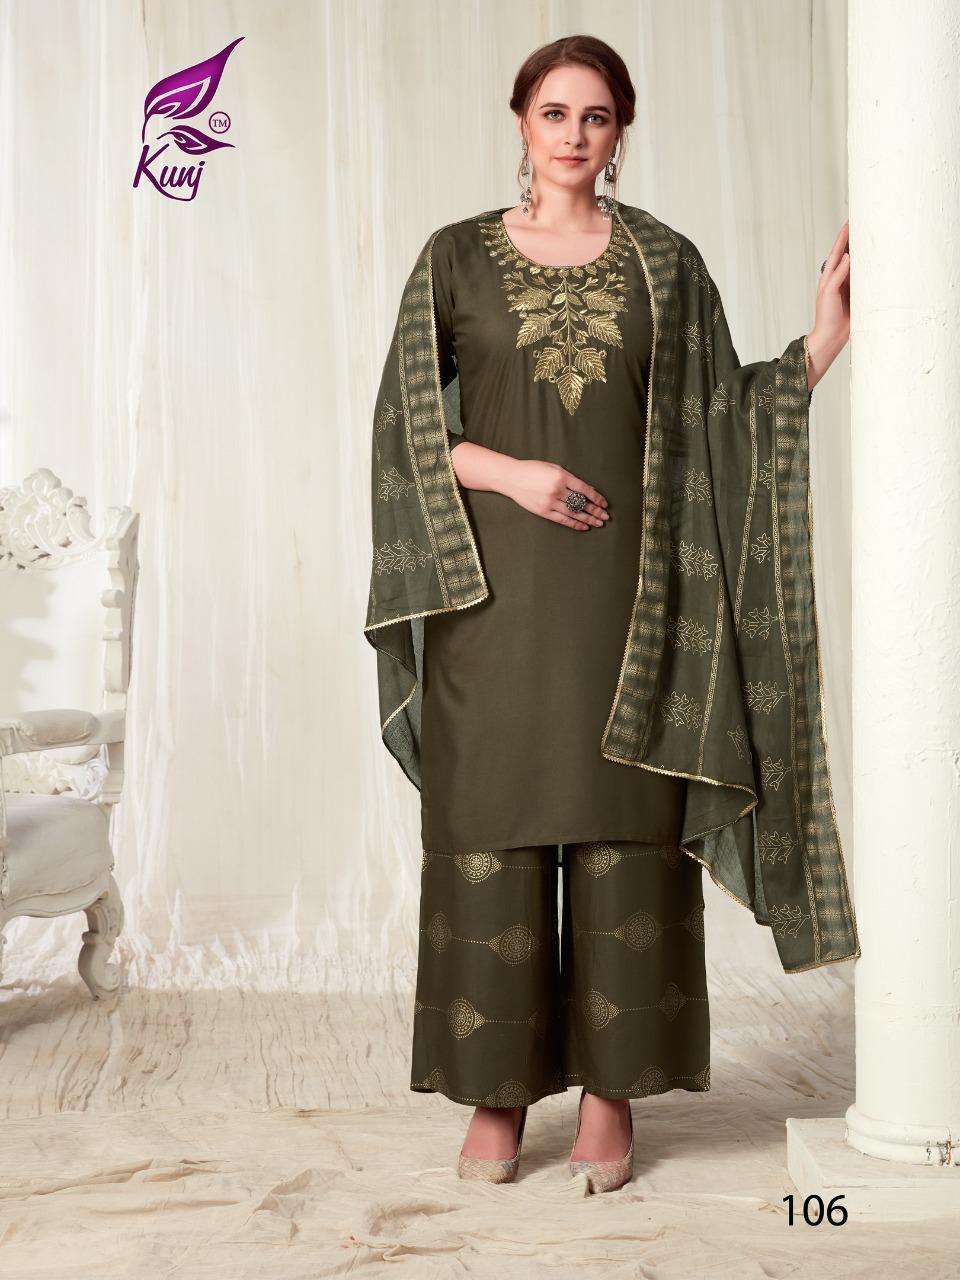 KAINAAT VOL-1 BY KUNJ 101 TO 107 SERIES BEAUTIFUL STYLISH SUITS FANCY COLORFUL CASUAL WEAR & ETHNIC WEAR & READY TO WEAR RAYON WITH ZARI WORK DRESSES AT WHOLESALE PRICE